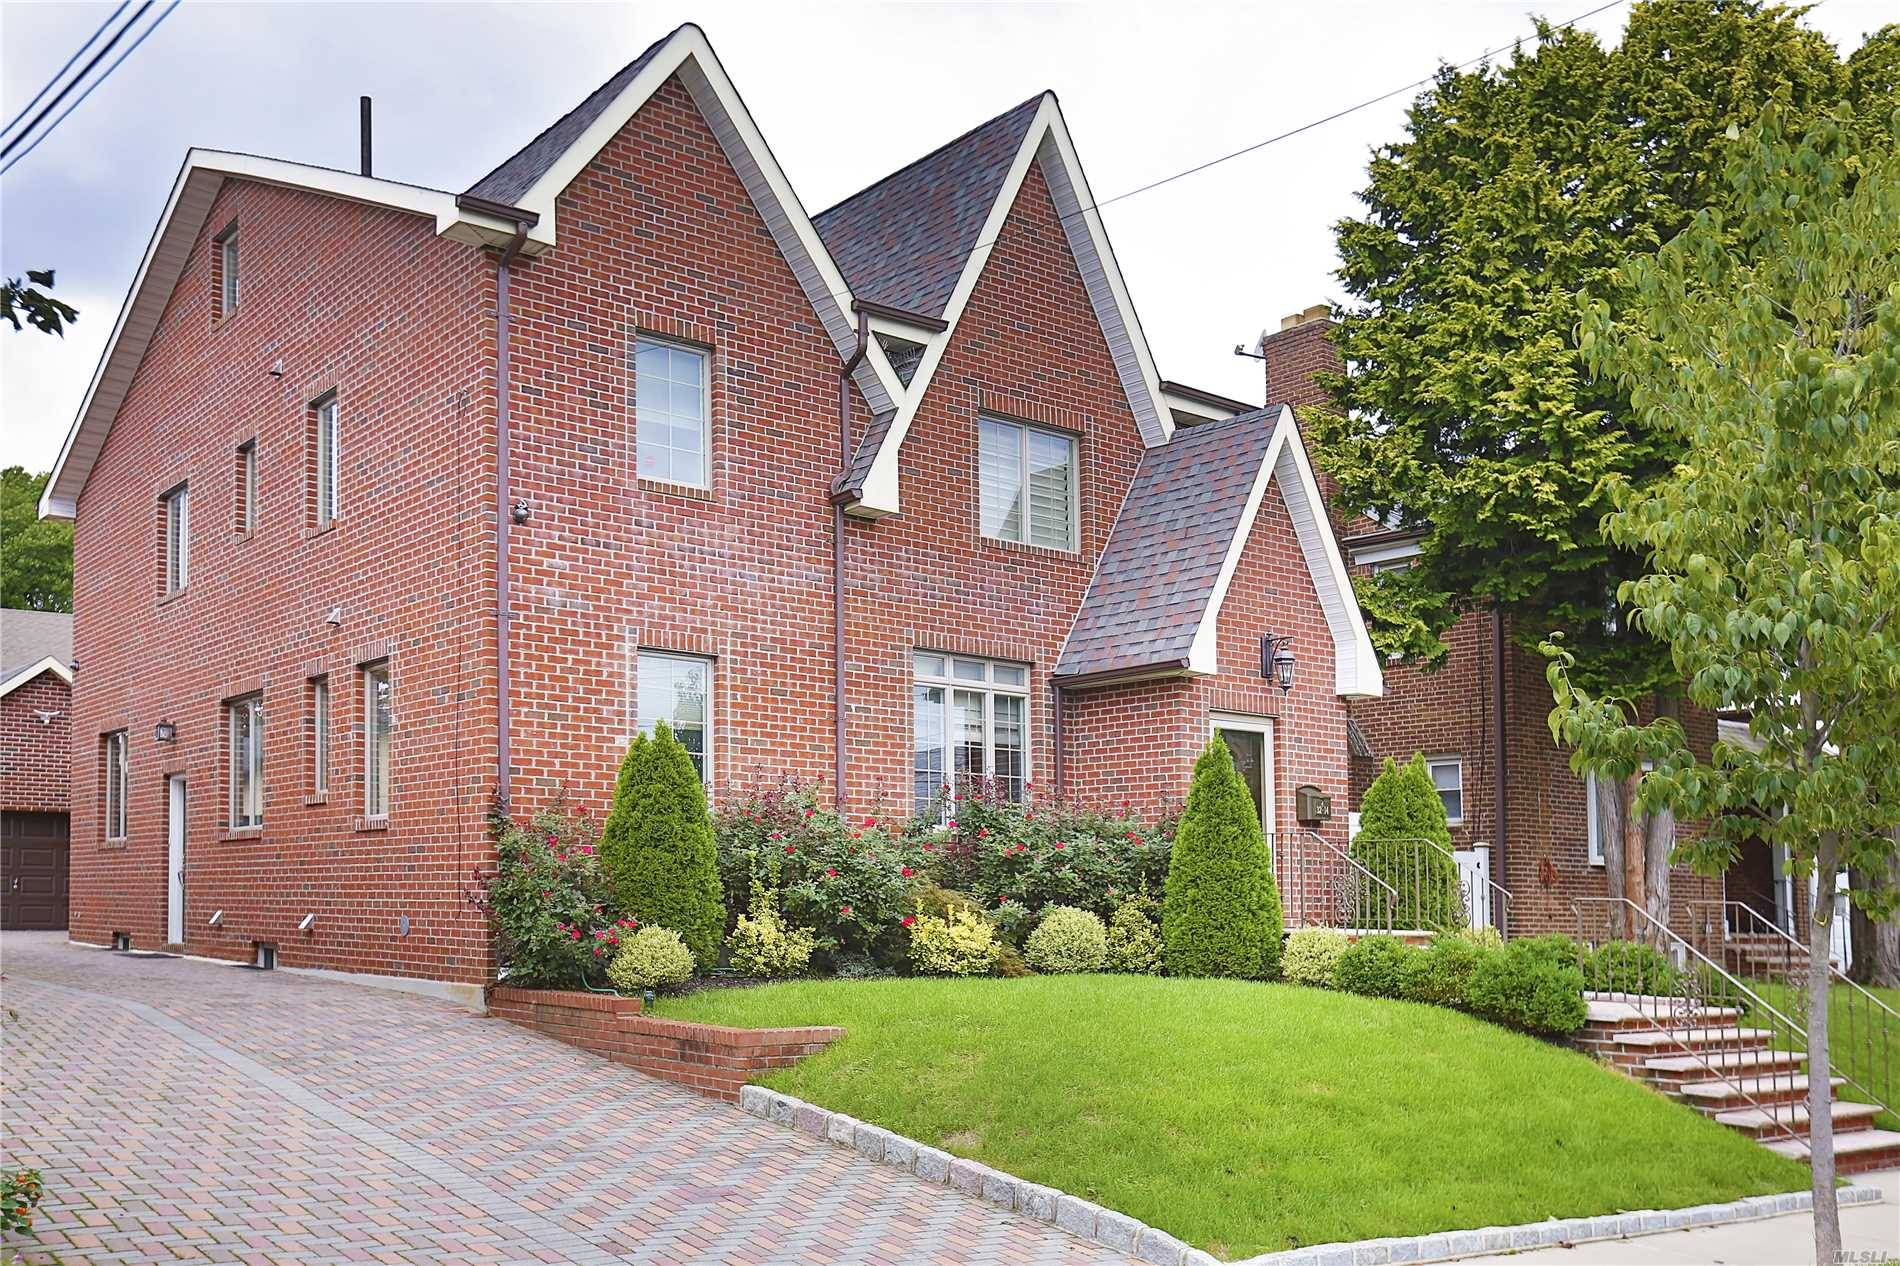 Rare Find- Elegant, Luxurious And Bright Custom Built 5 Bedroom Tudor With All Brick In The Heart Of Flushing, Mins To Lirr.